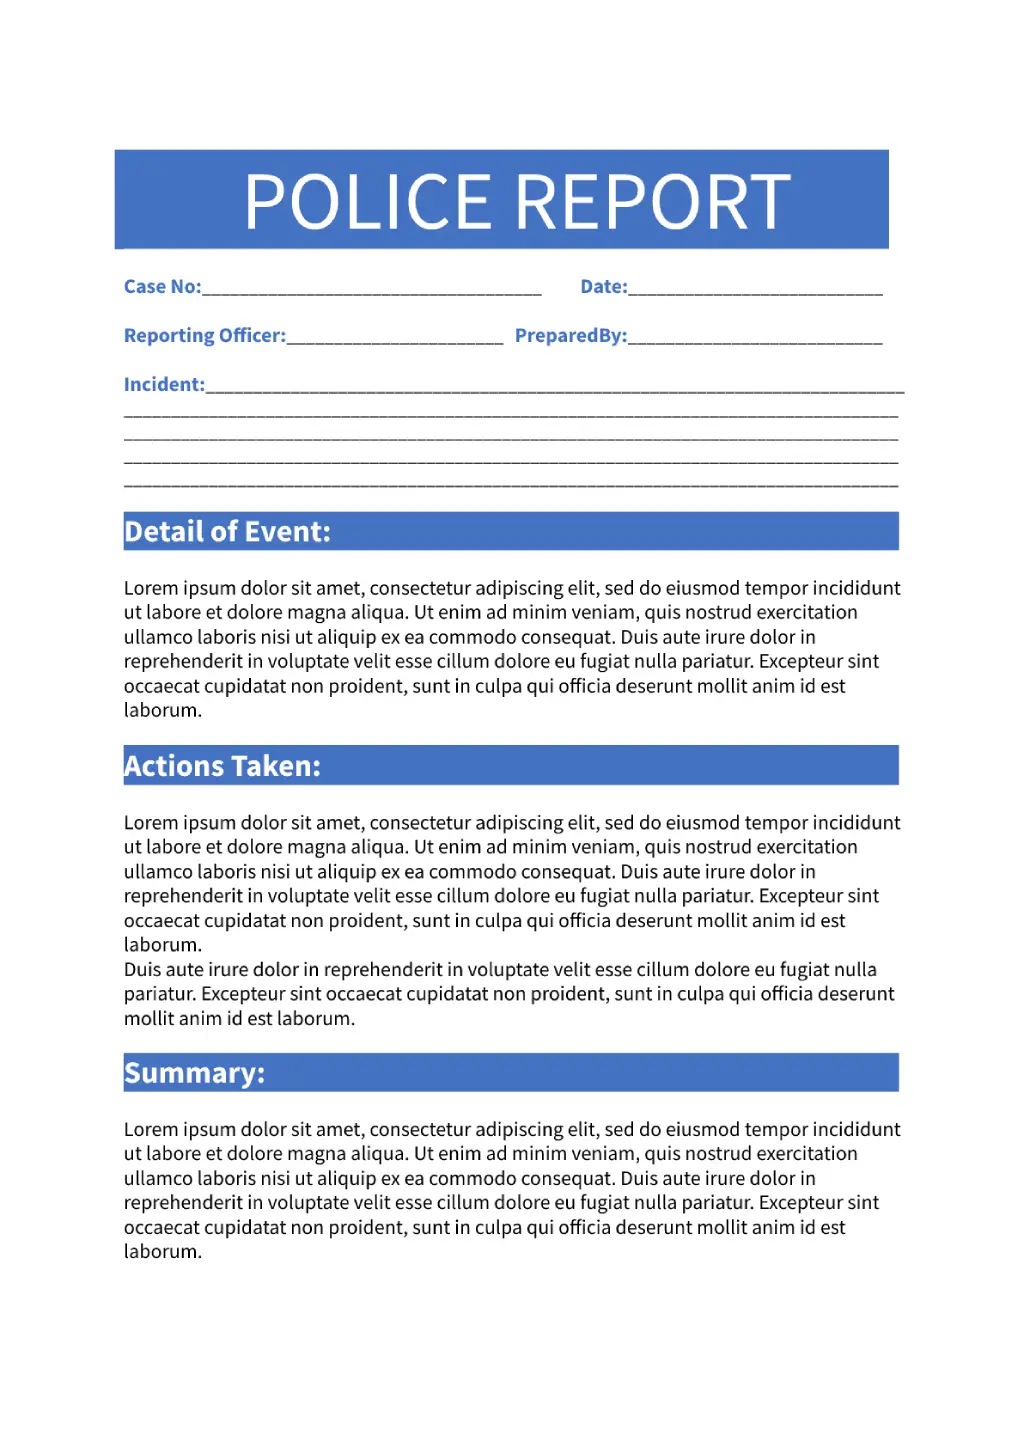 Police Report Template for Google Docs